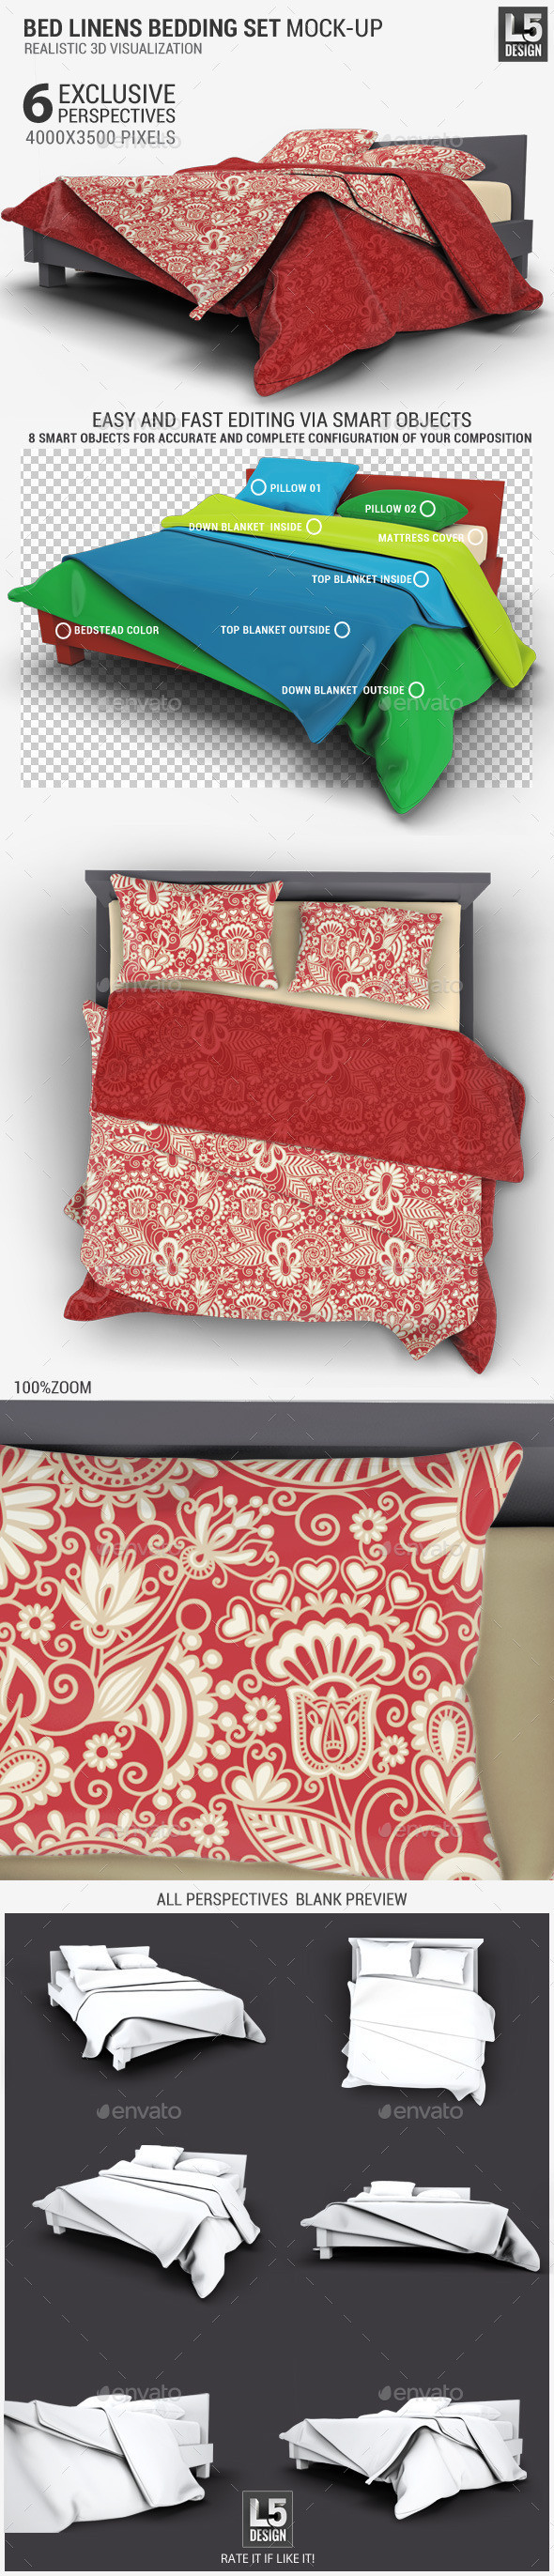 Bed linens imagepre